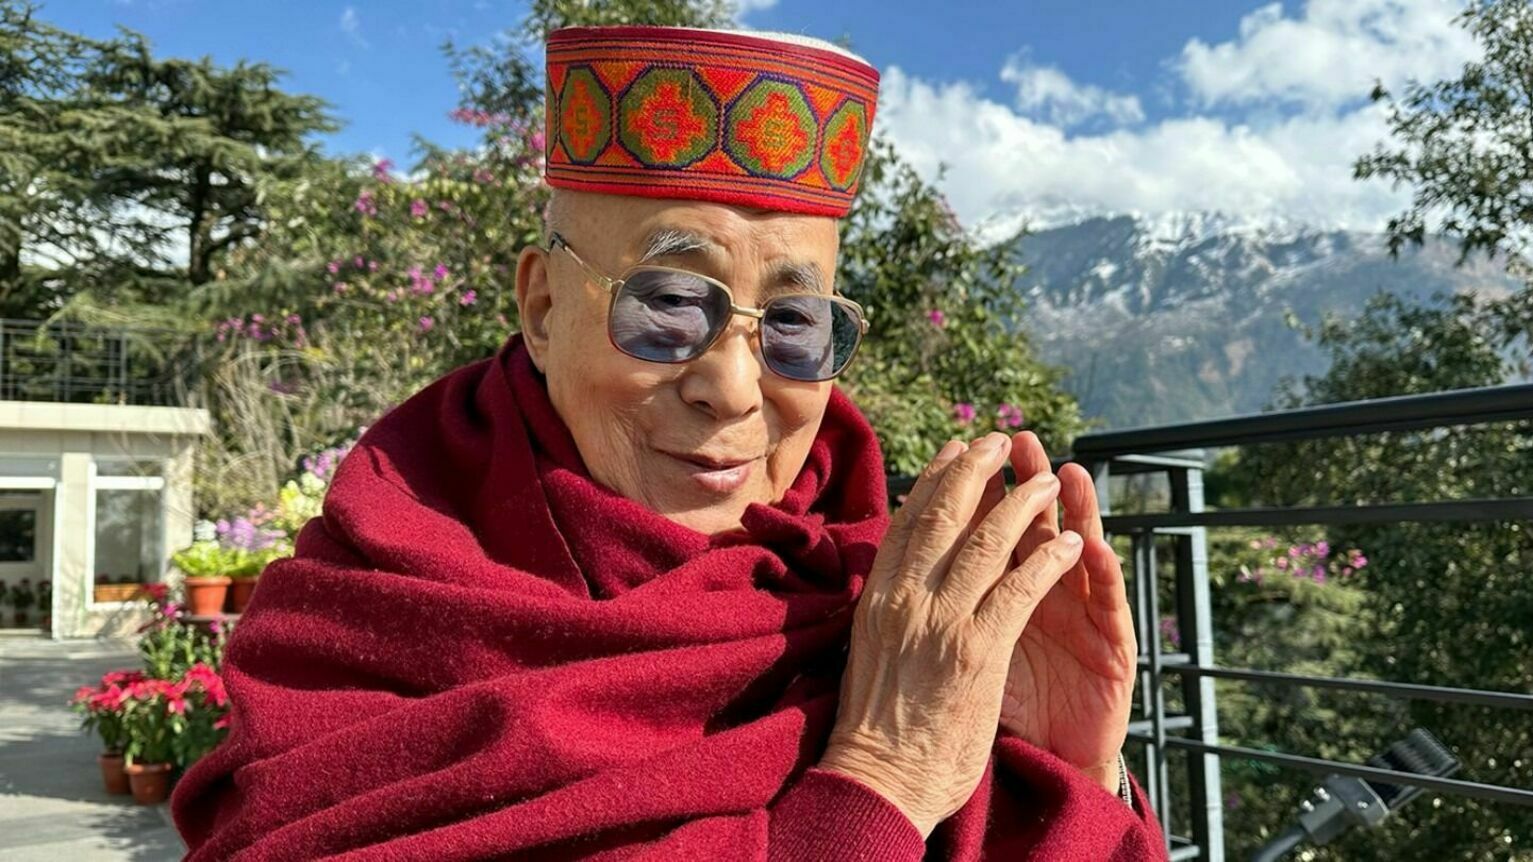 The Dalai Lama apologized to the boy for offering to "suck his tongue"